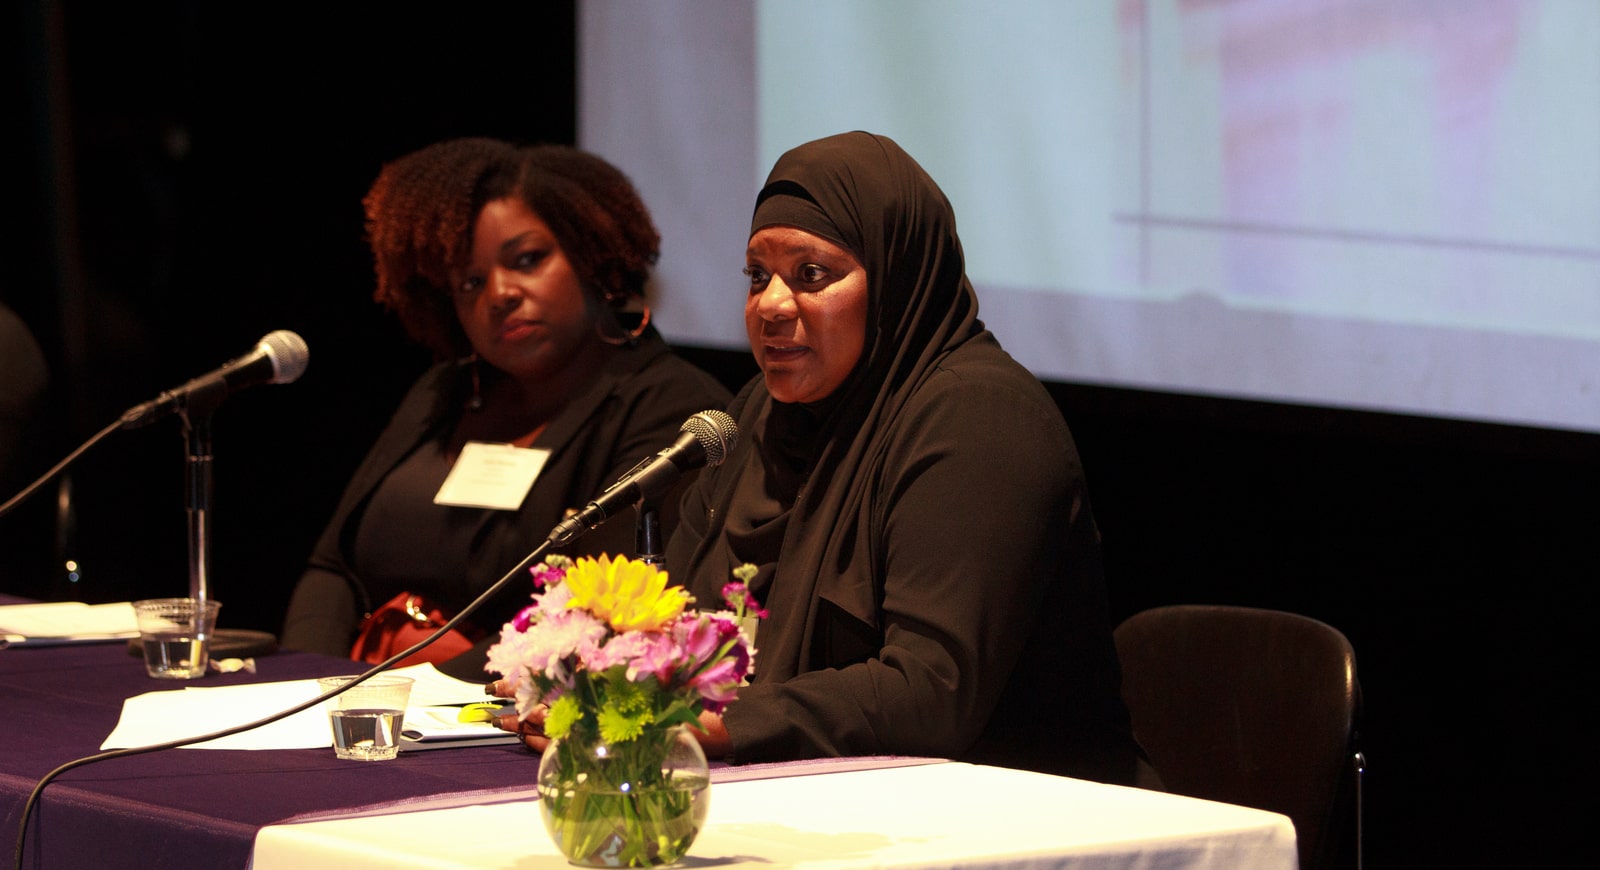 Photo of two Black women on a panel. The hijabi woman is speaking, while the woman beside her listens.